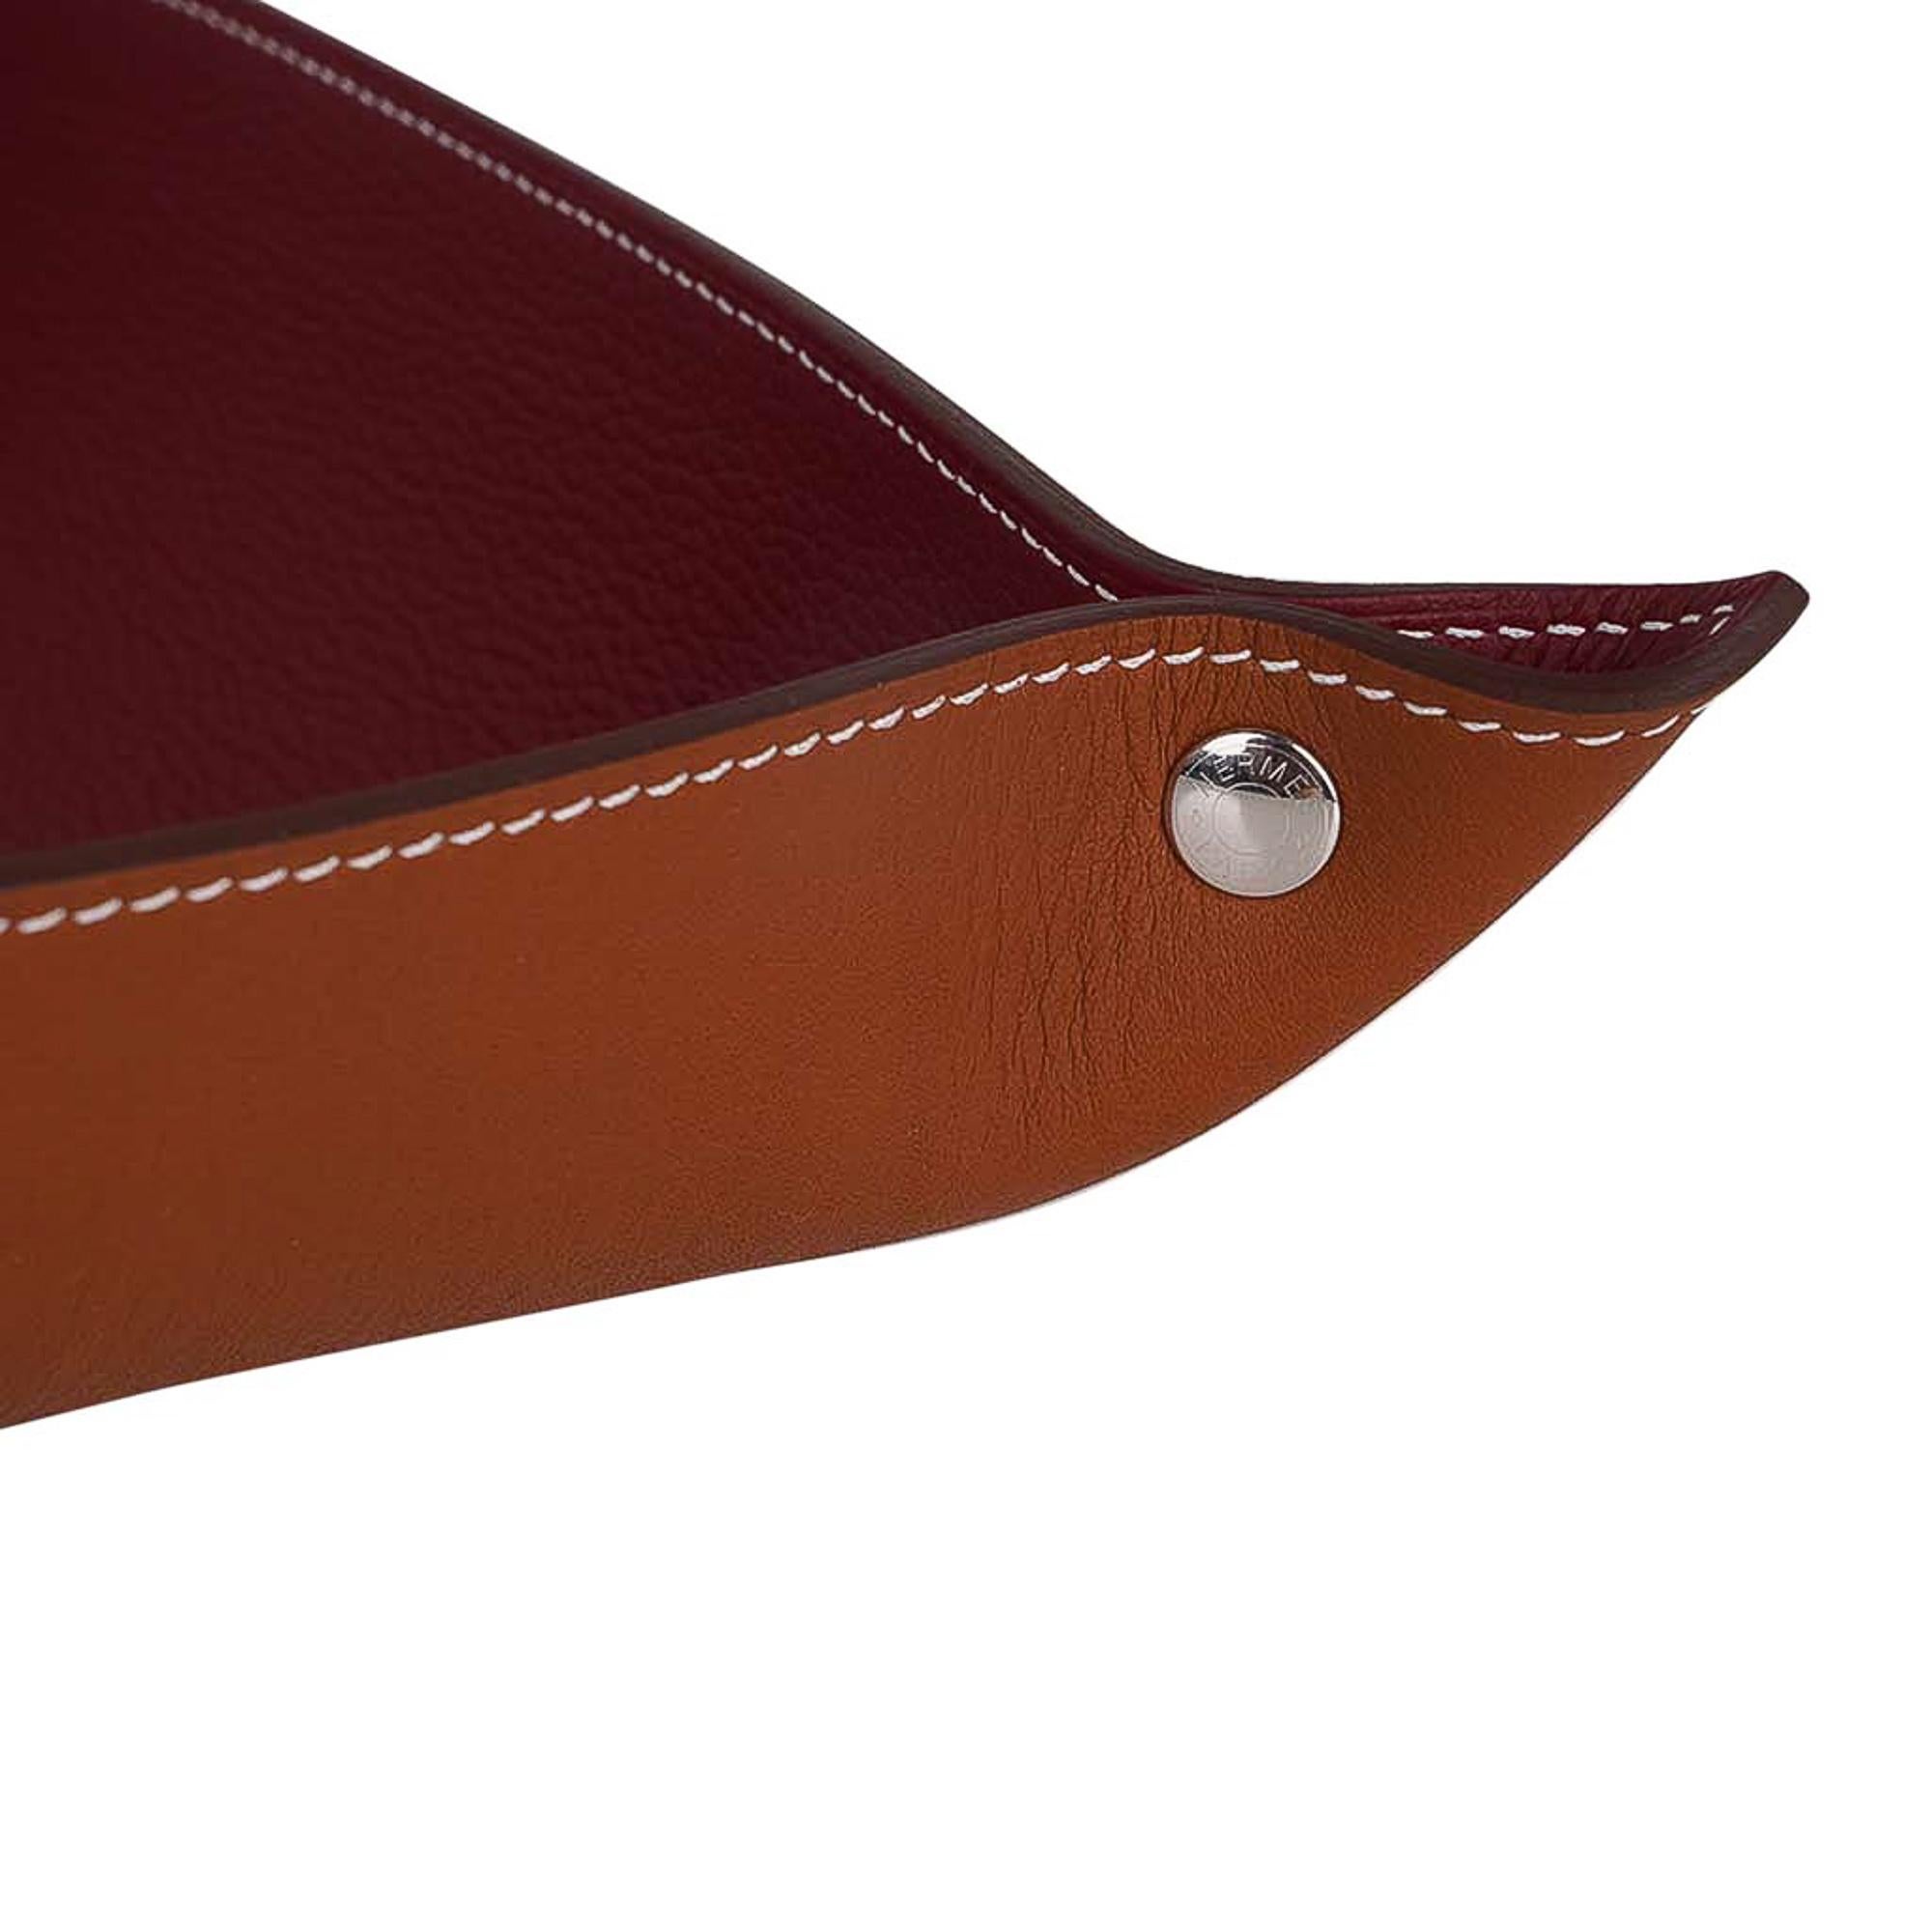 Mightychic offers a guaranteed authentic Hermes For the Desk Mises et Relances bi-color change tray.
Perforated H.
Beautifully crafted rectangular tray featuring Rouge H and Gold.
Palladium clou de selle snaps.
A beautiful desk or bedroom